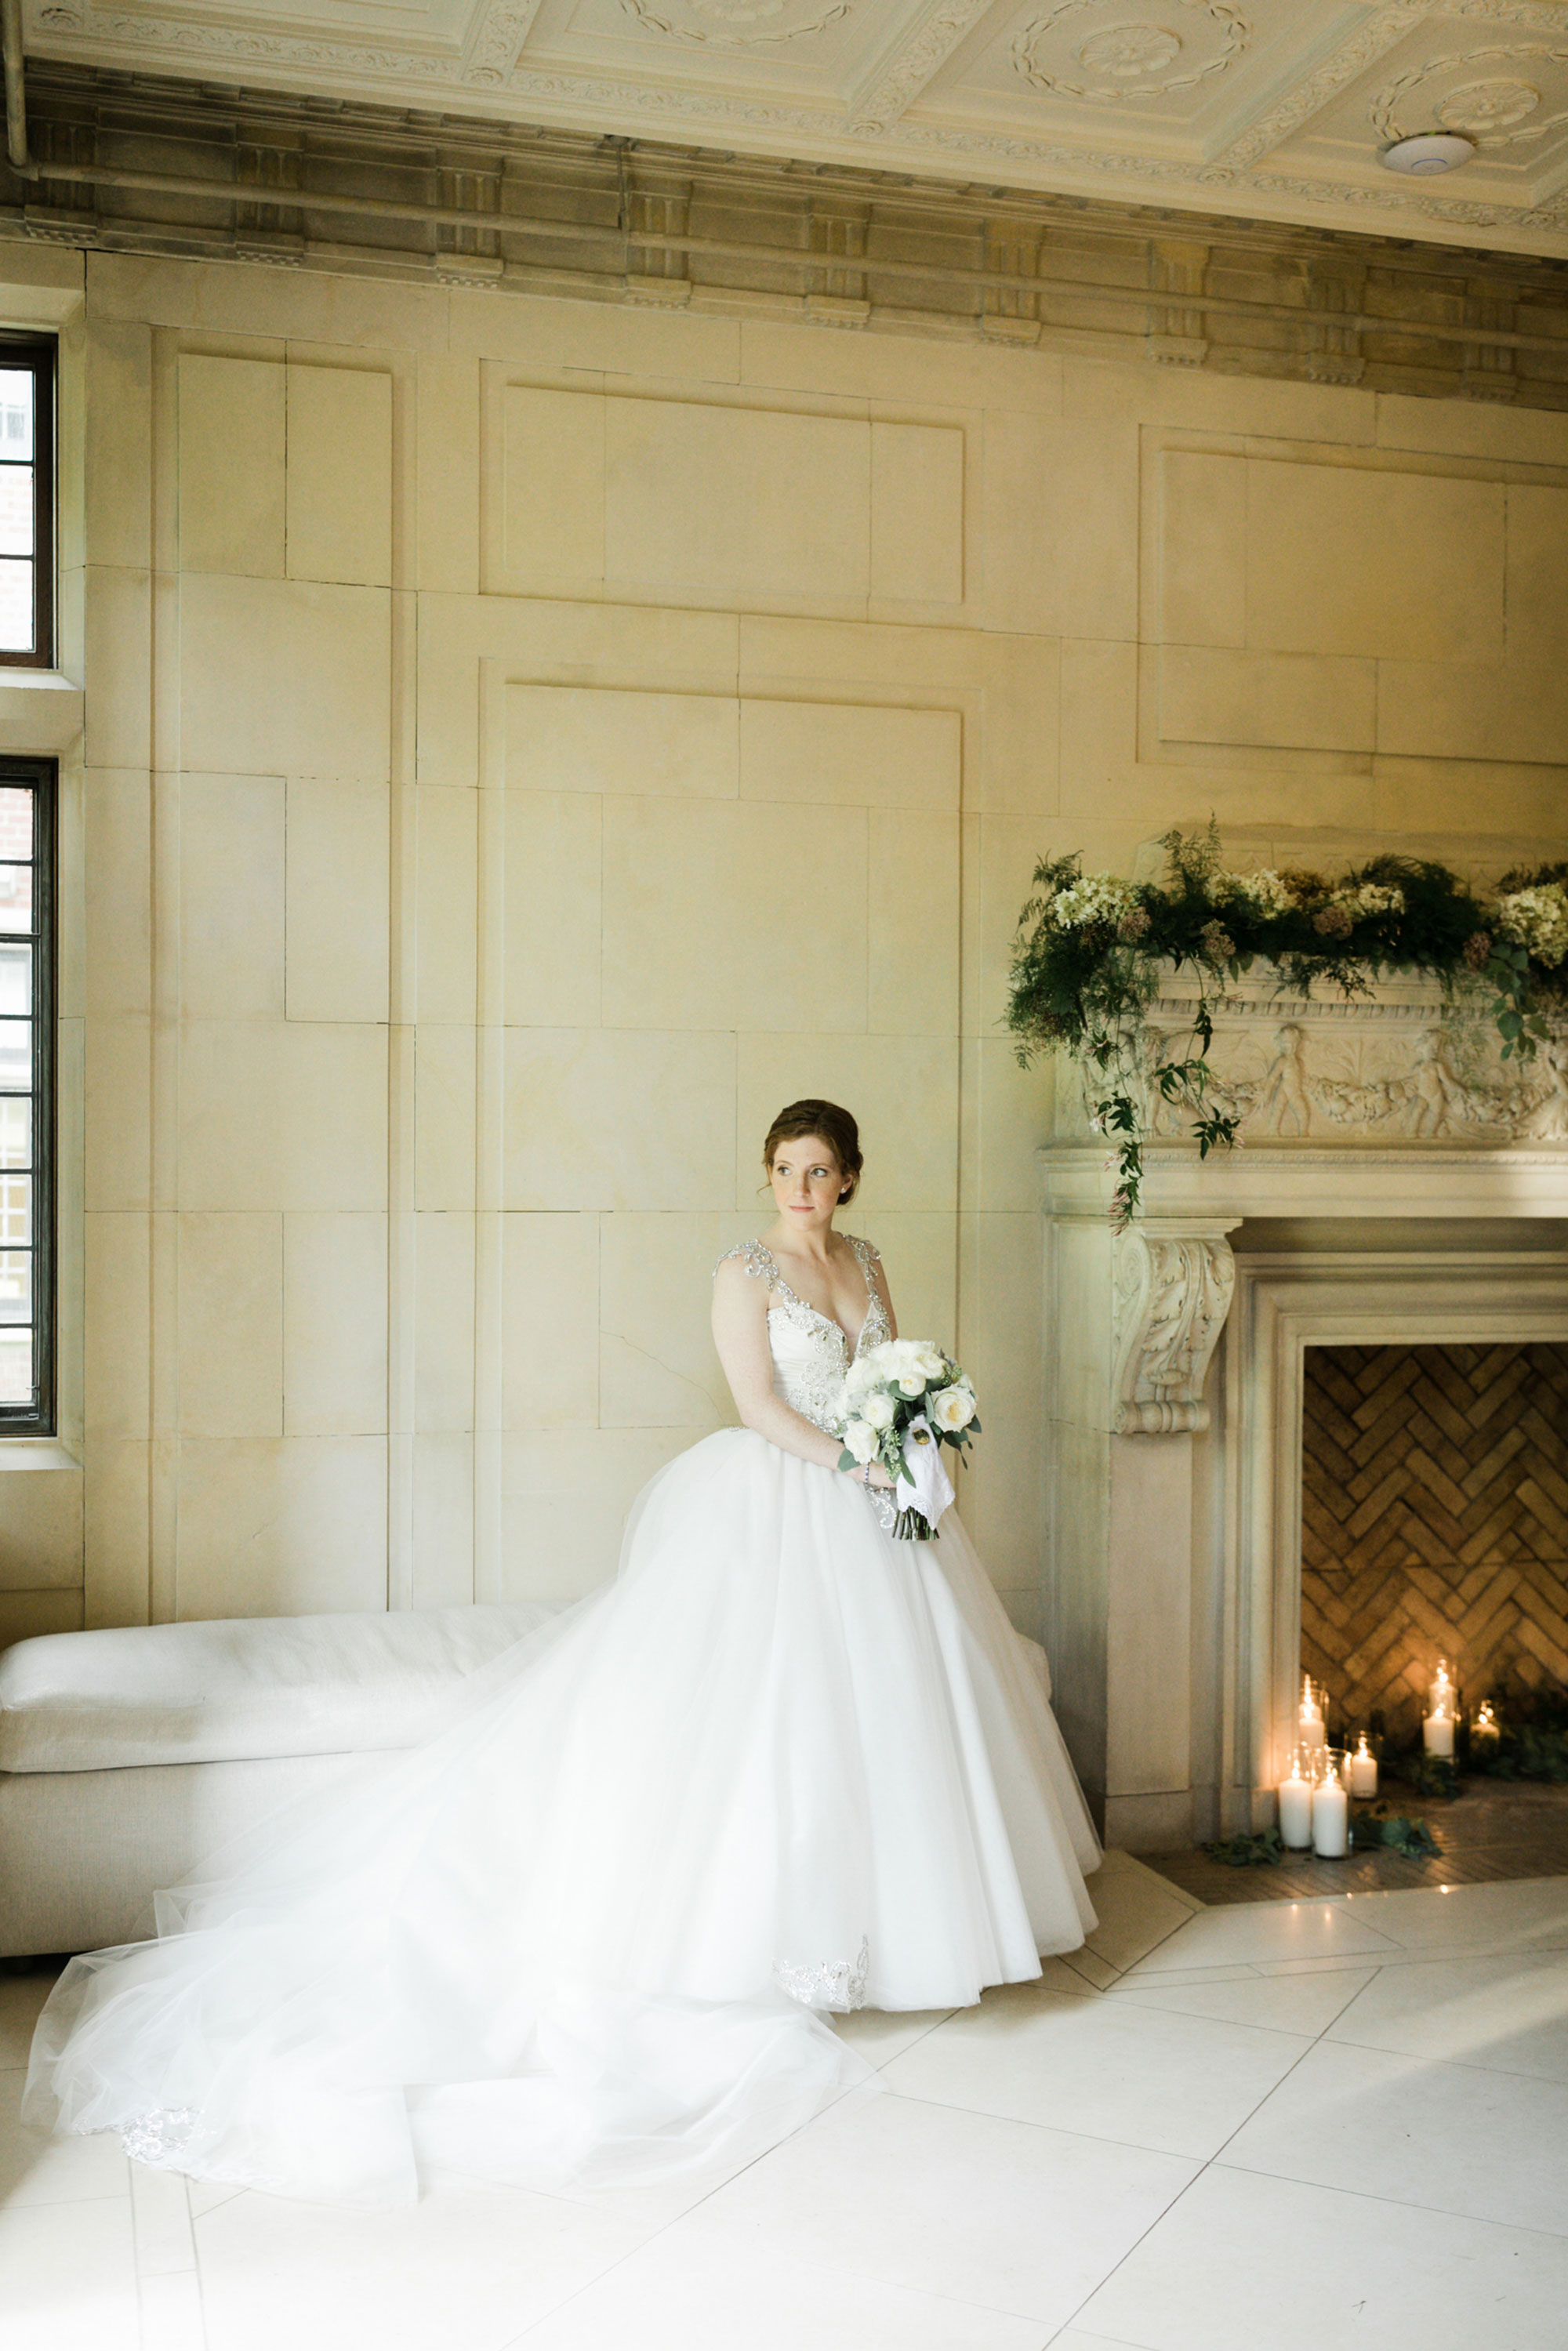 The Mansion at Natirar Fireplace Decor and Bride in Pnina Tornai Wedding Gown